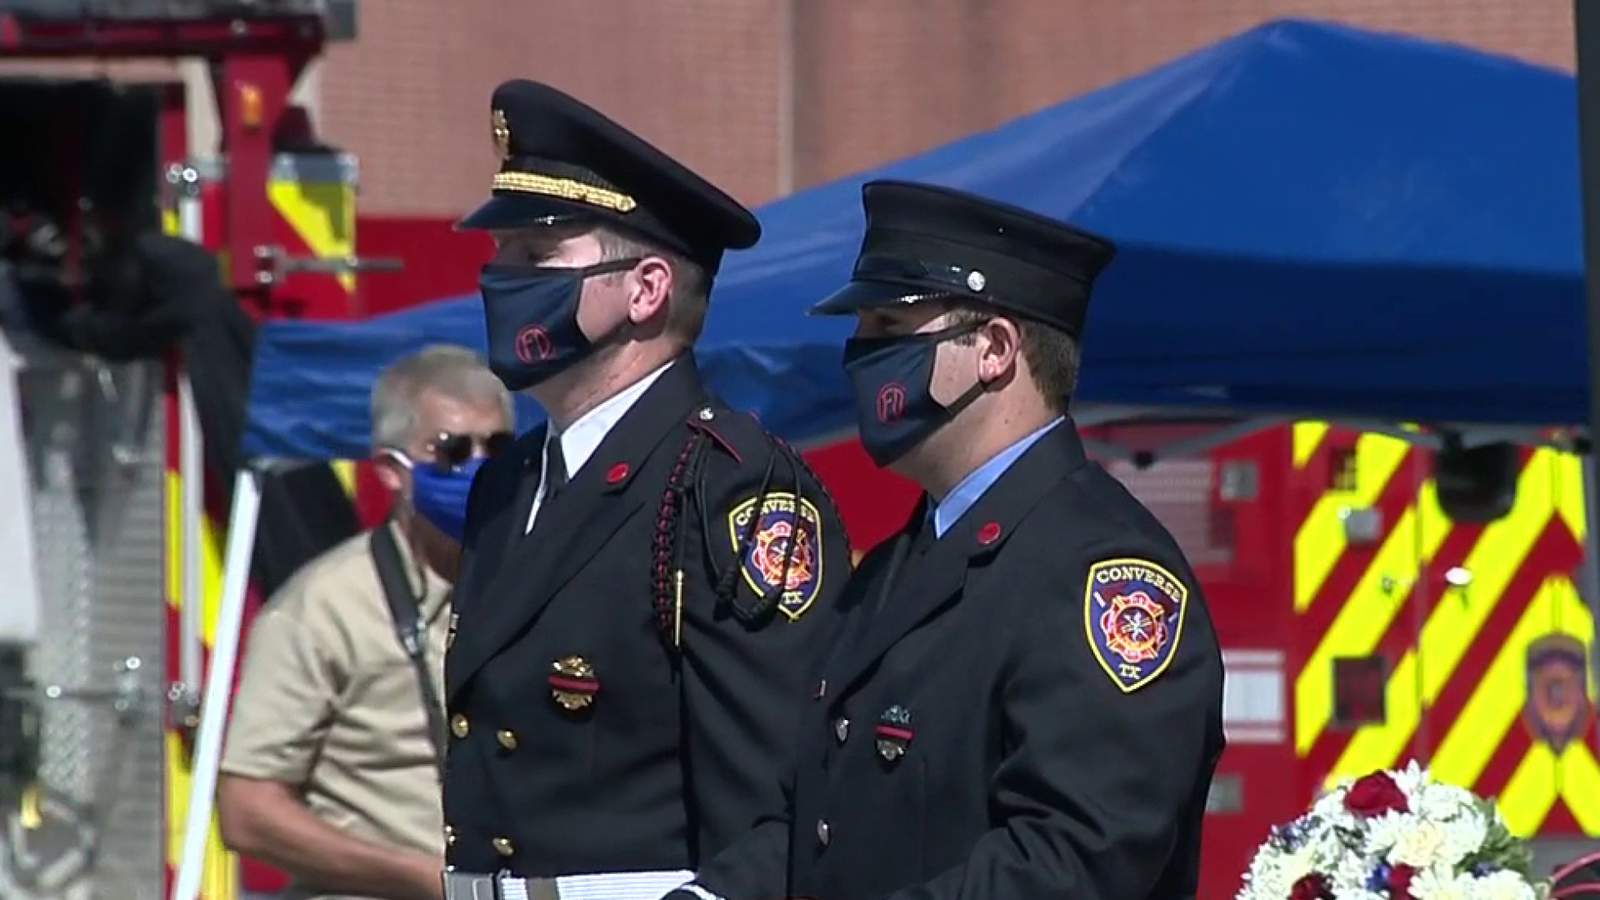 Converse fire captain honored with outdoor memorial service